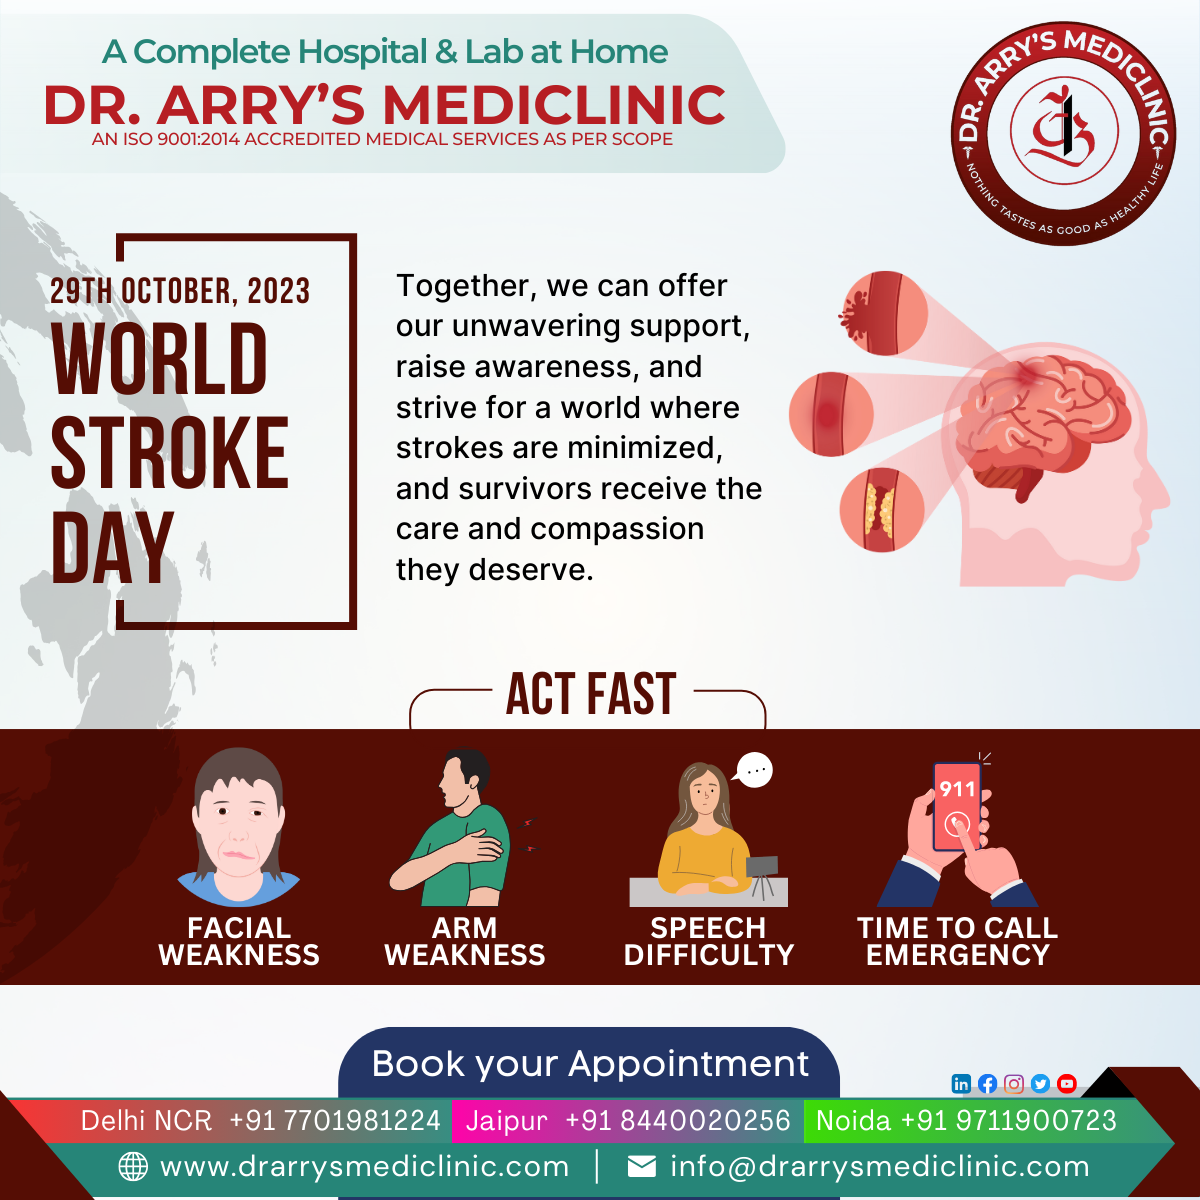 World Stroke Day- Dr. Arry's Mediclinic